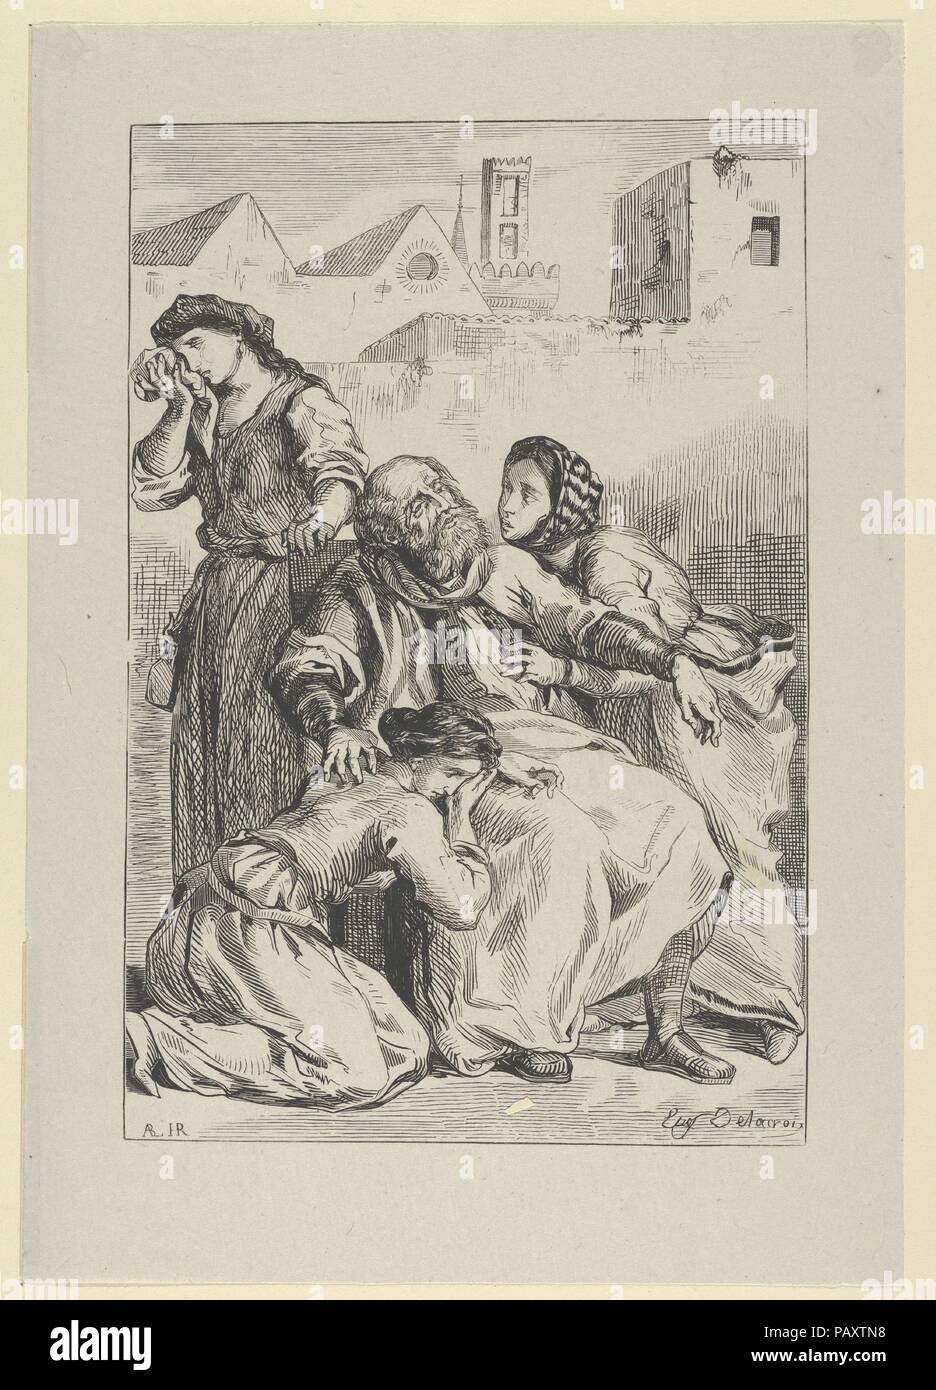 Death of Goetz von Berlichingen. Artist: Eugène Delacroix (French, Charenton-Saint-Maurice 1798-1863 Paris). Dimensions: Block: 8 9/16 x 5 3/4 in. (21.8 x 14.6 cm)  Sheet: 10 11/16 x 7 1/2 in. (27.1 x 19.1 cm). Series/Portfolio: Goethe, Goetz von Berlichingen. Date: 1845.  The subject of this print is based on a scene in Goethe's play (published in German in 1773; and French in 1823) that tells the story of  the life of a German knight (1480-1562) who fought to regain the privileges of free knights, nullified by the emperor Maximilian I in 1495. Museum: Metropolitan Museum of Art, New York, US Stock Photo